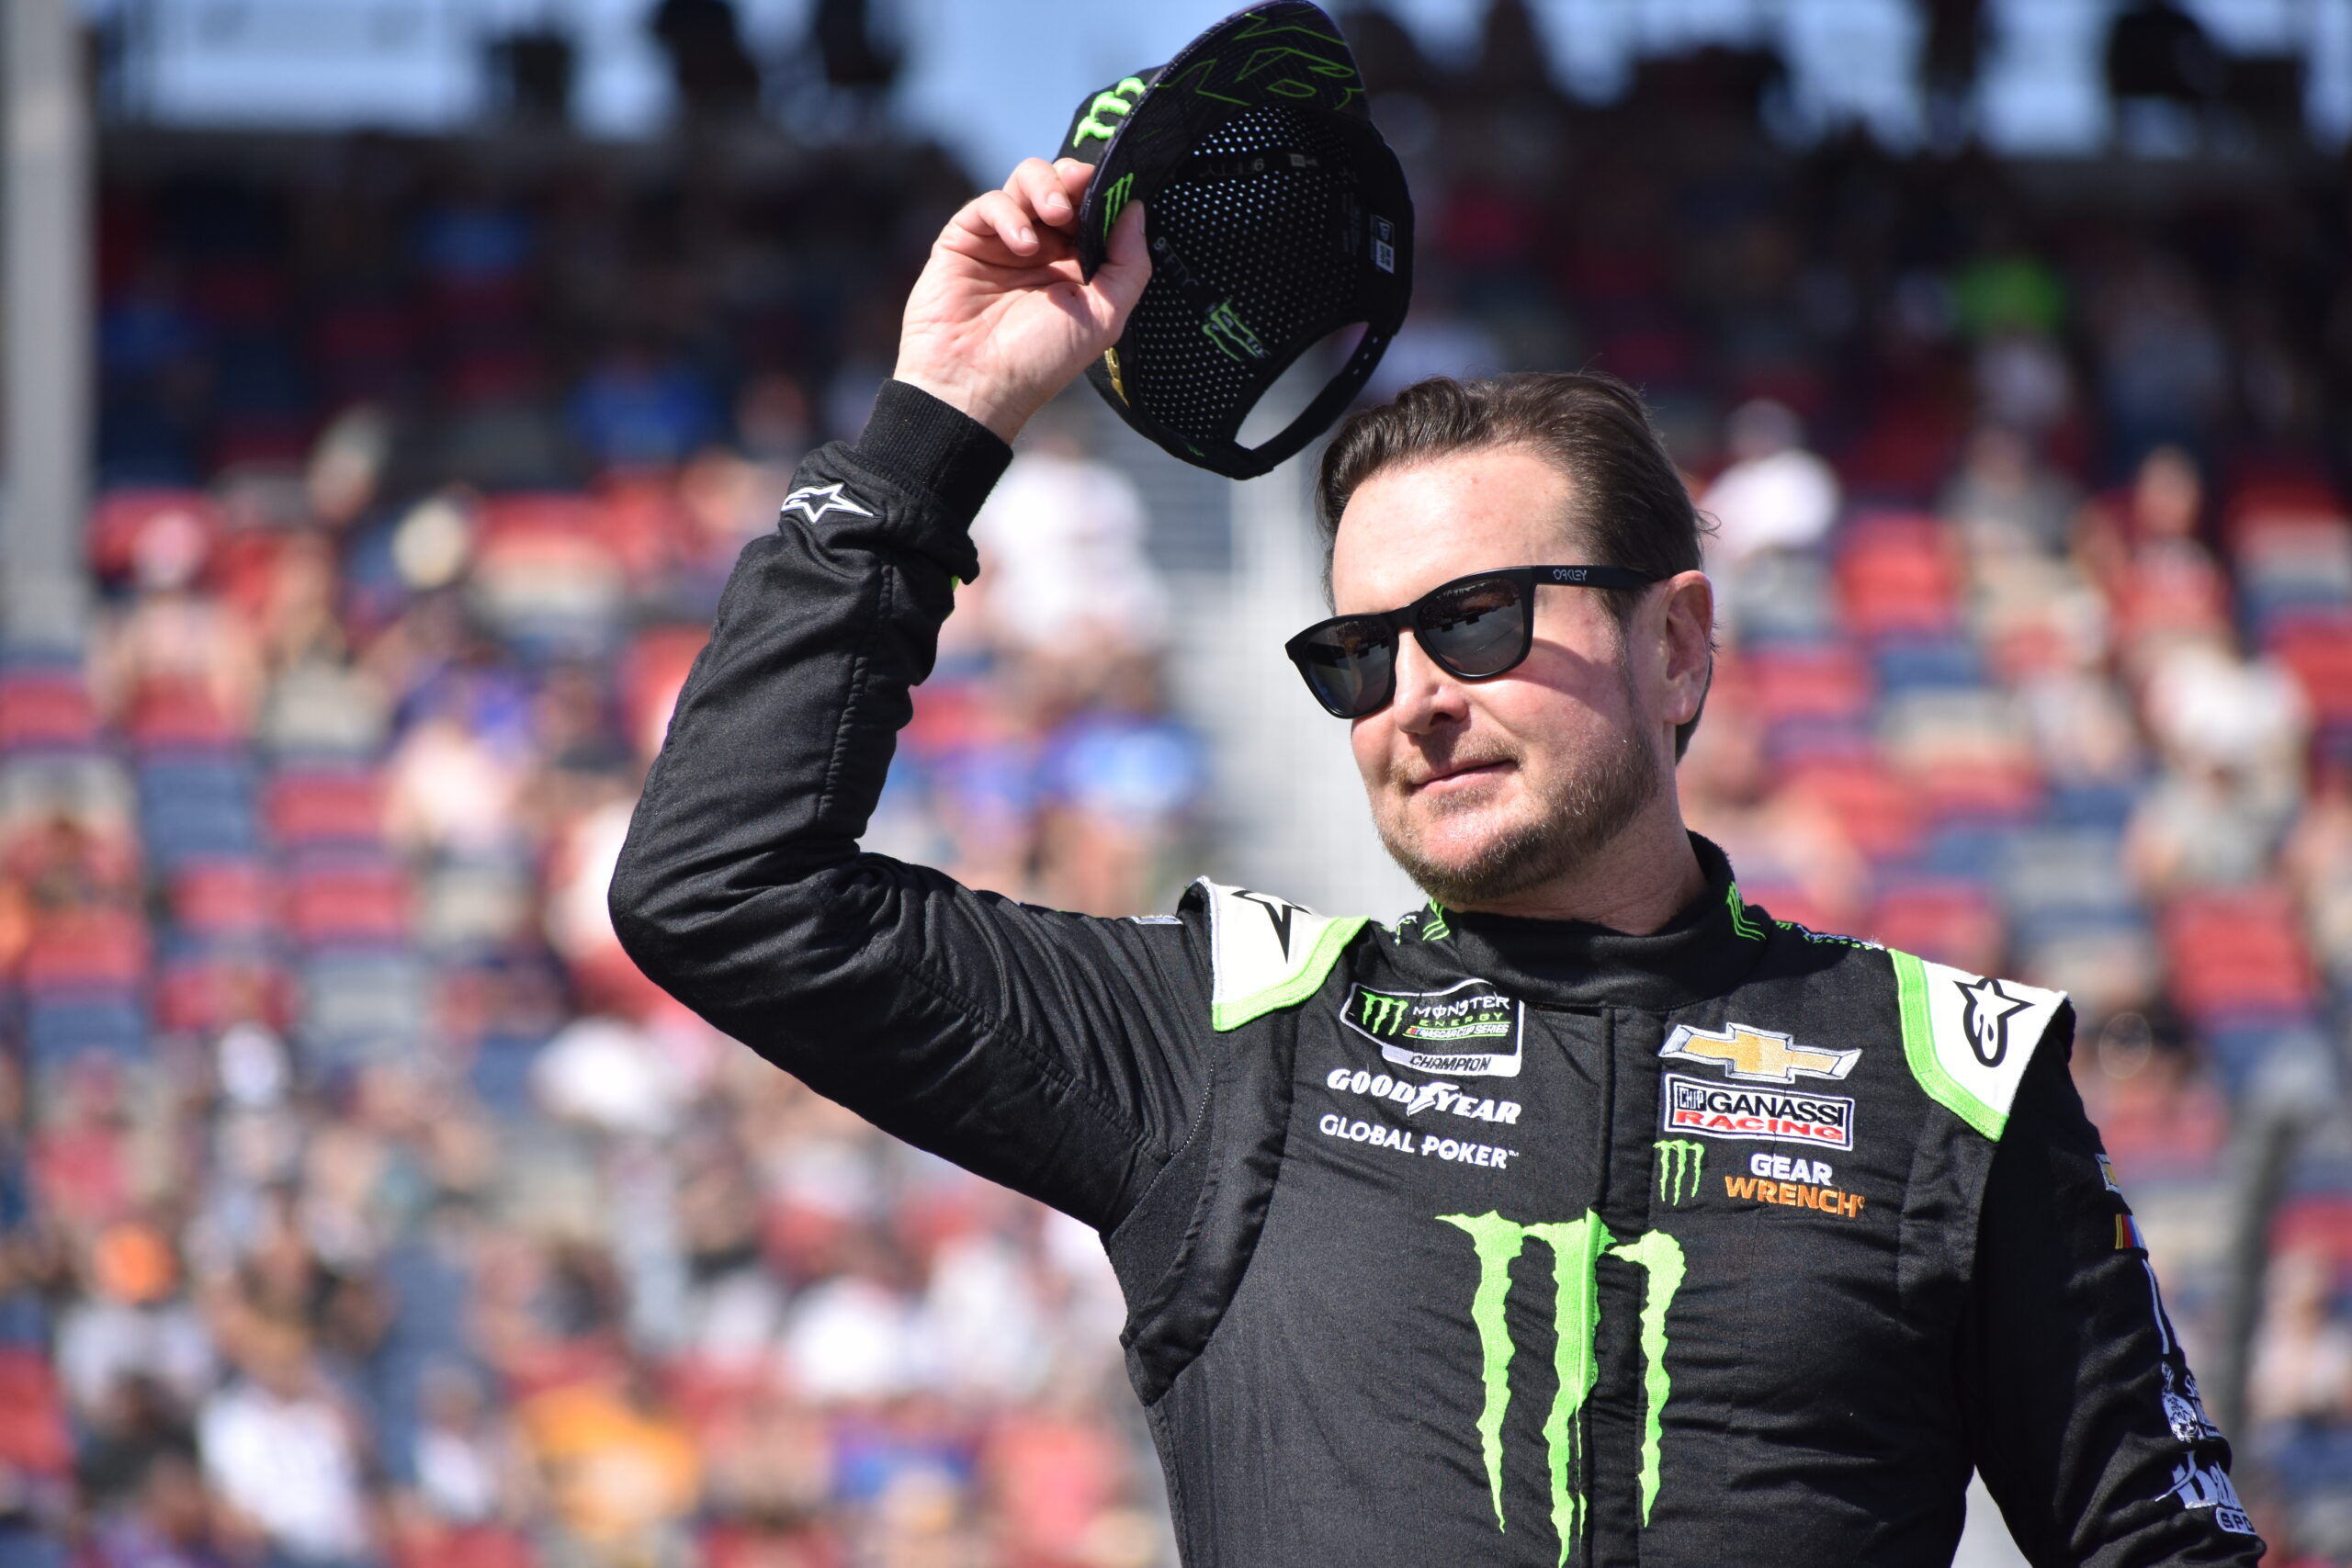 All things considered, Kurt Busch remains as competitive as ever. (Photo: Luis Torres/The Podium Finish)